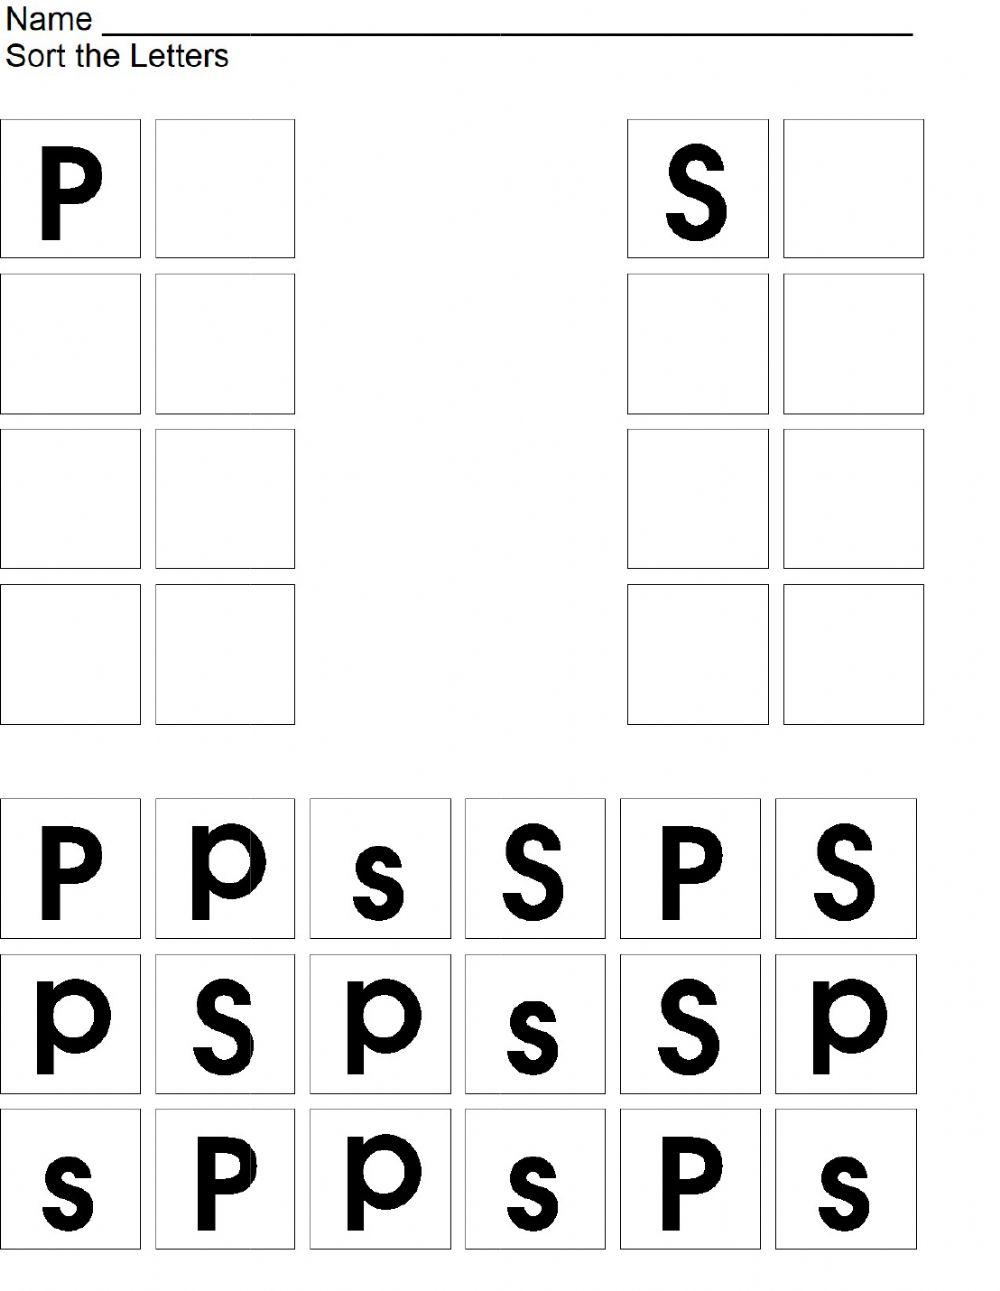 Letter Sort P and S